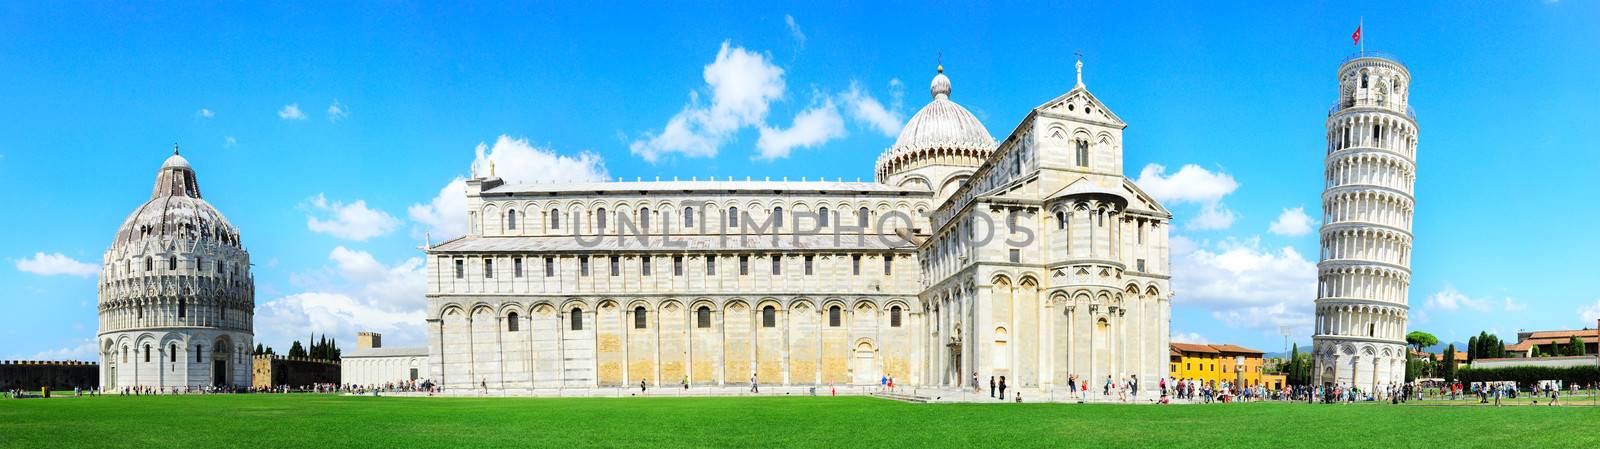 Piazza dei Miracoli complex with the leaning tower of Pisa , Italy 